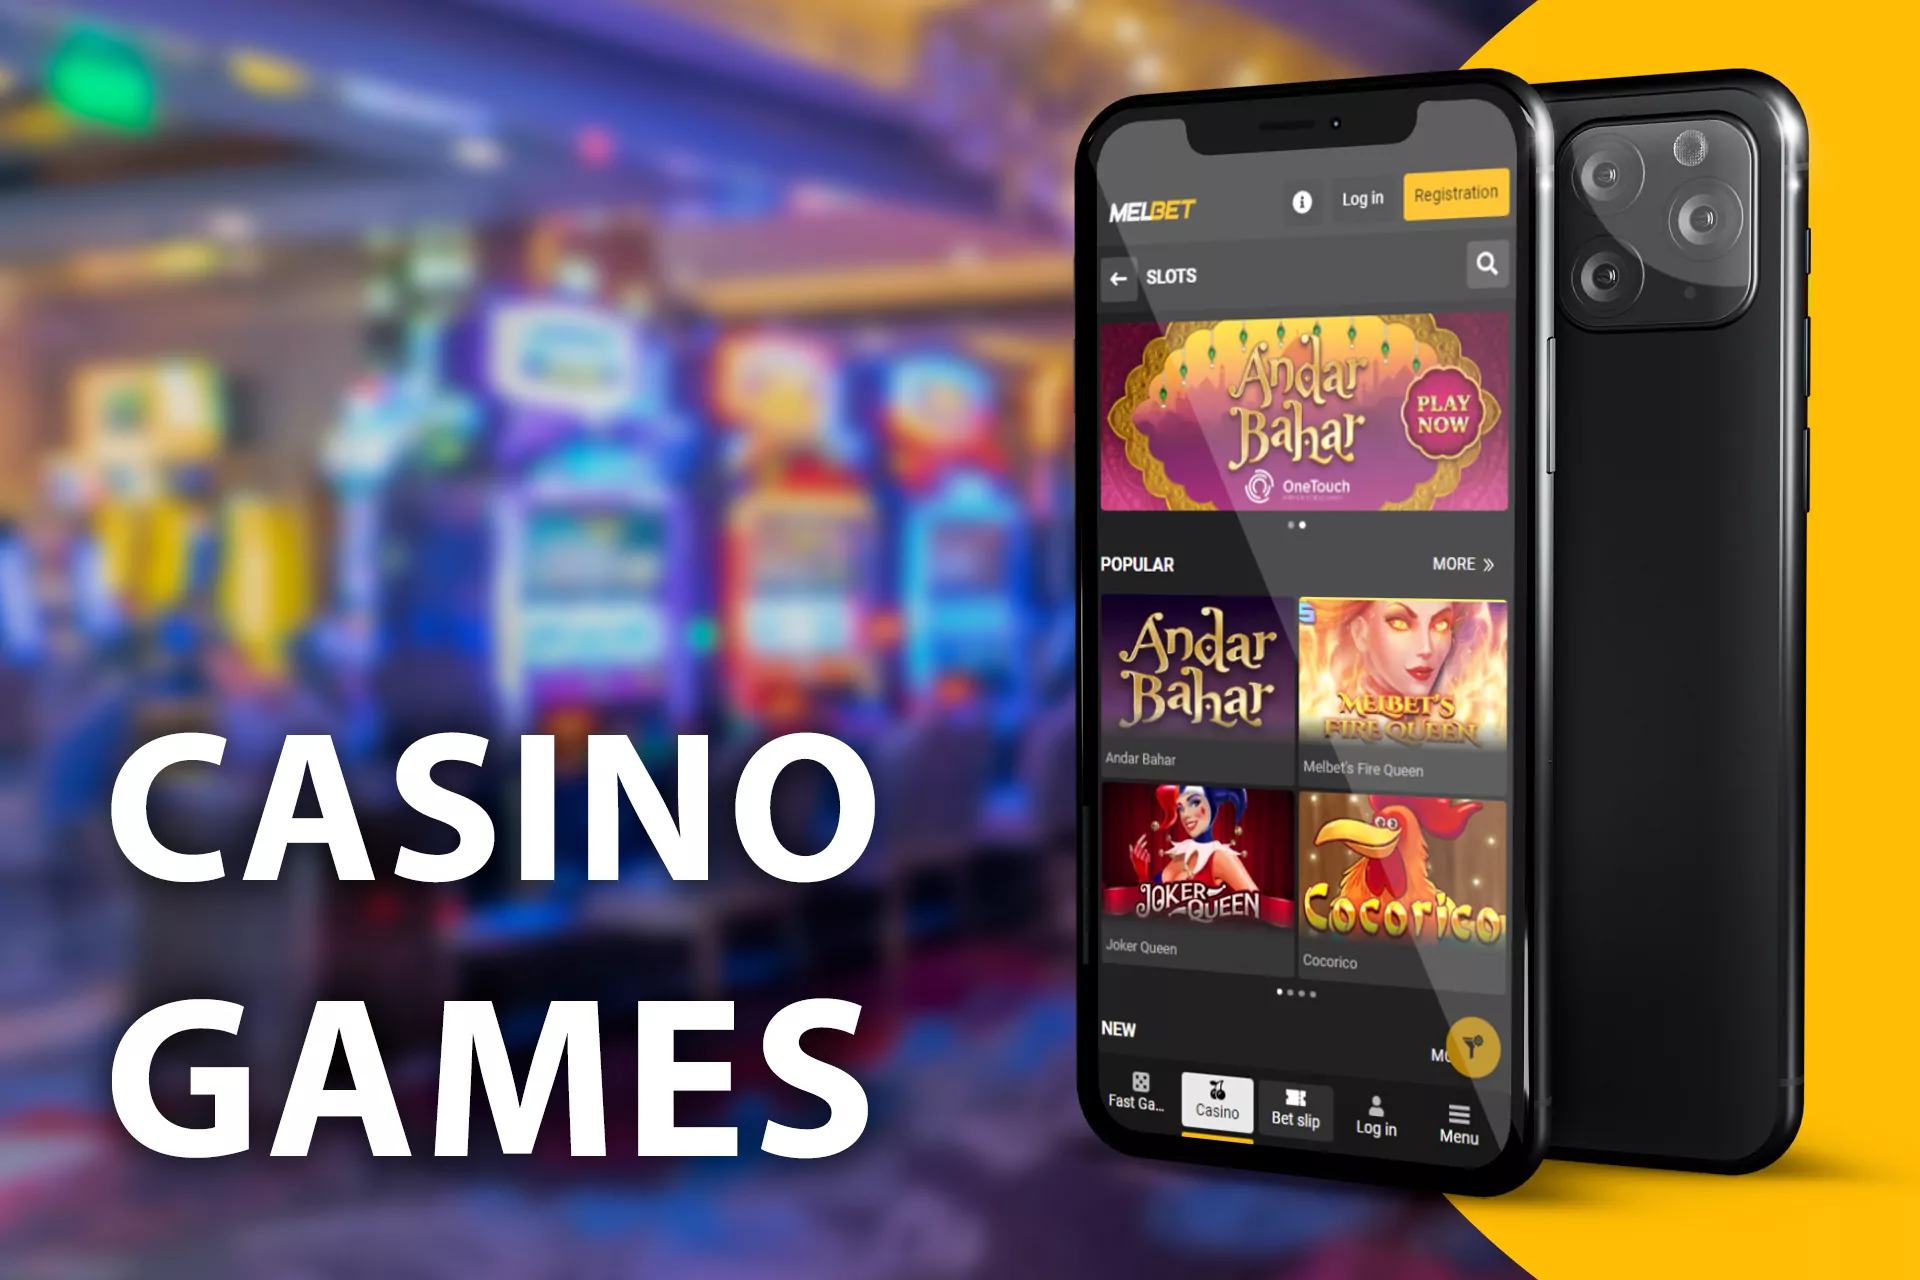 In the Melbet app there is a wide assortment of casino games.